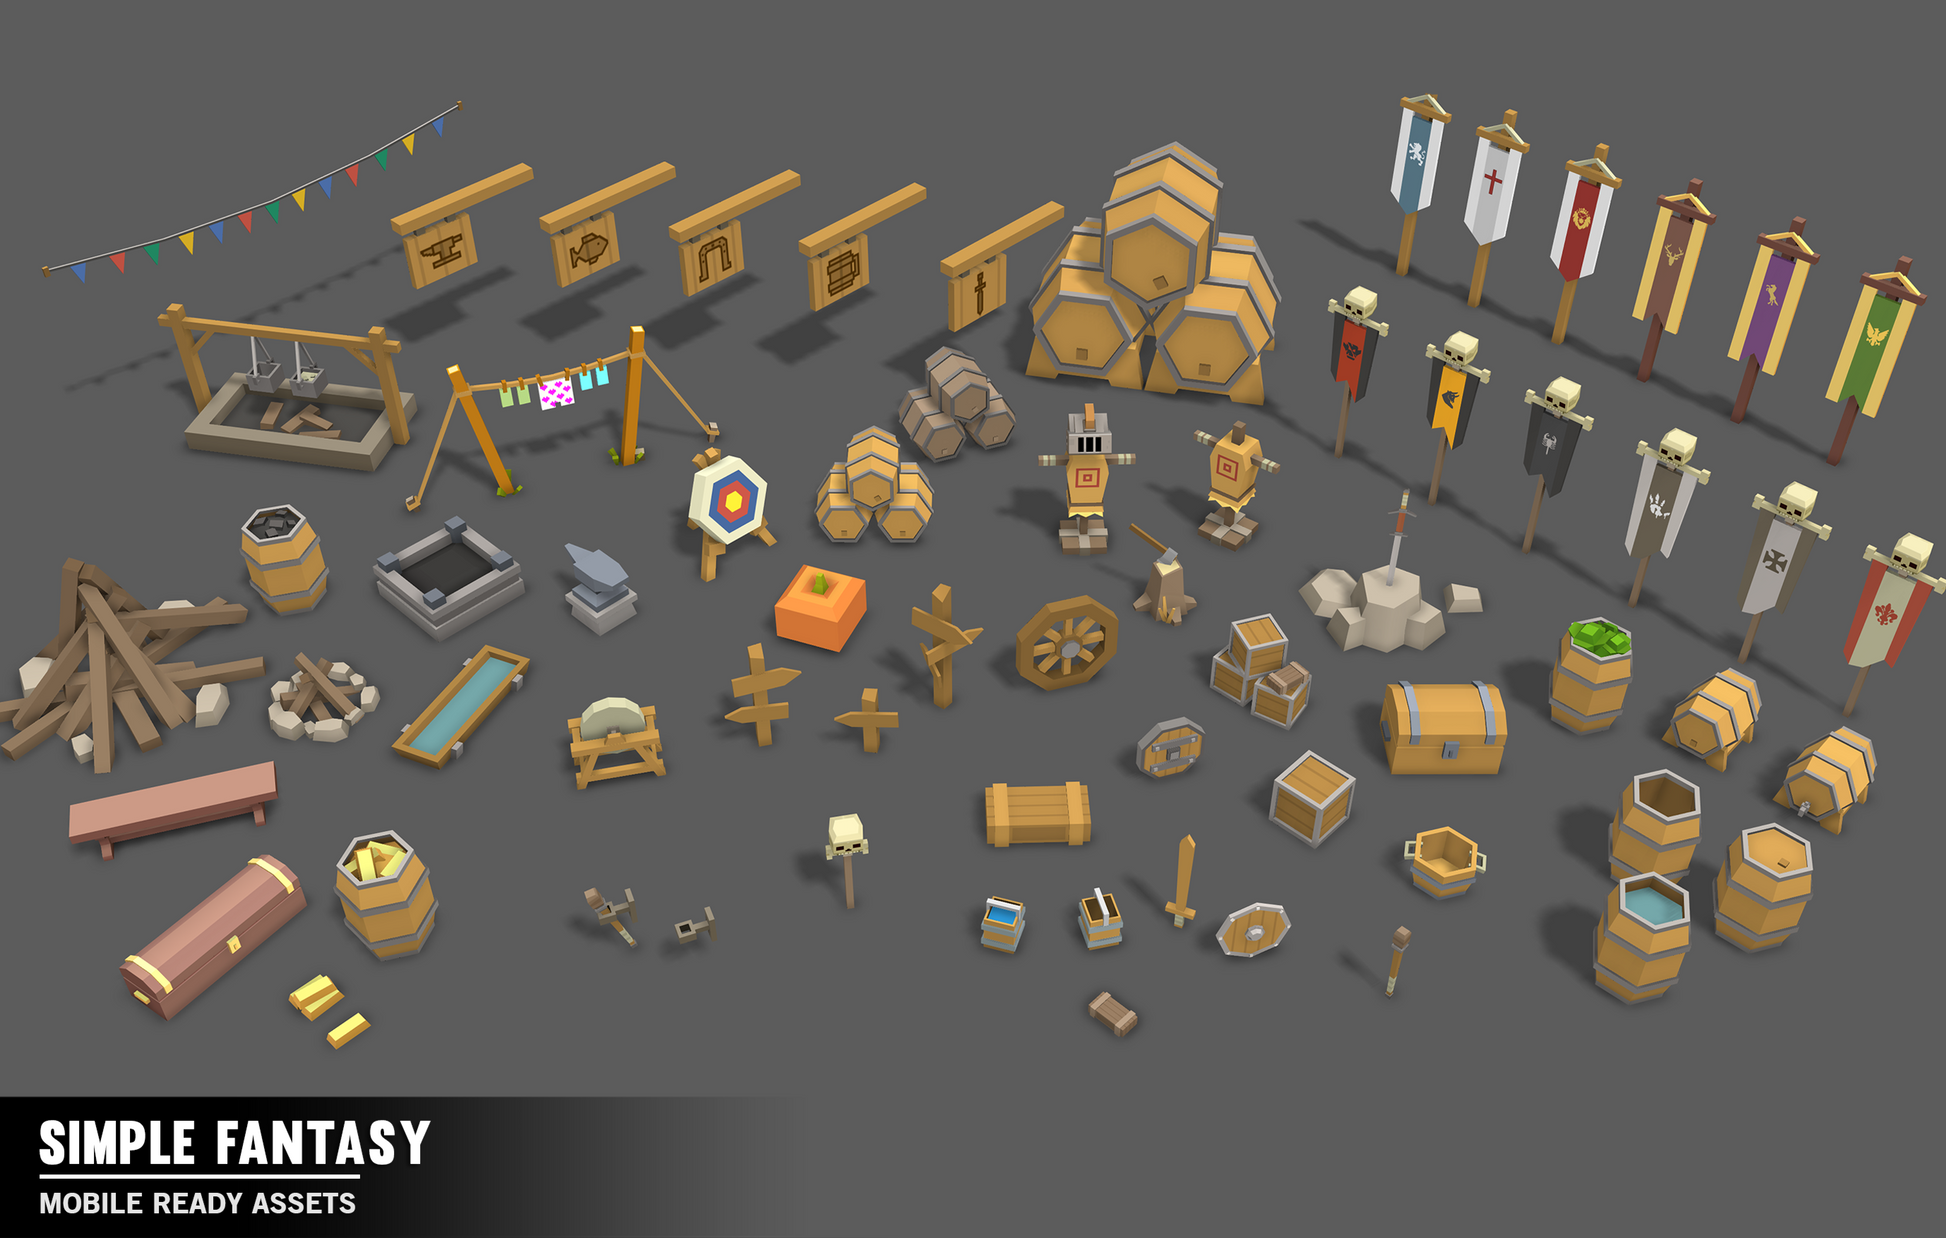 Simple Fantasy marketplace and building assets